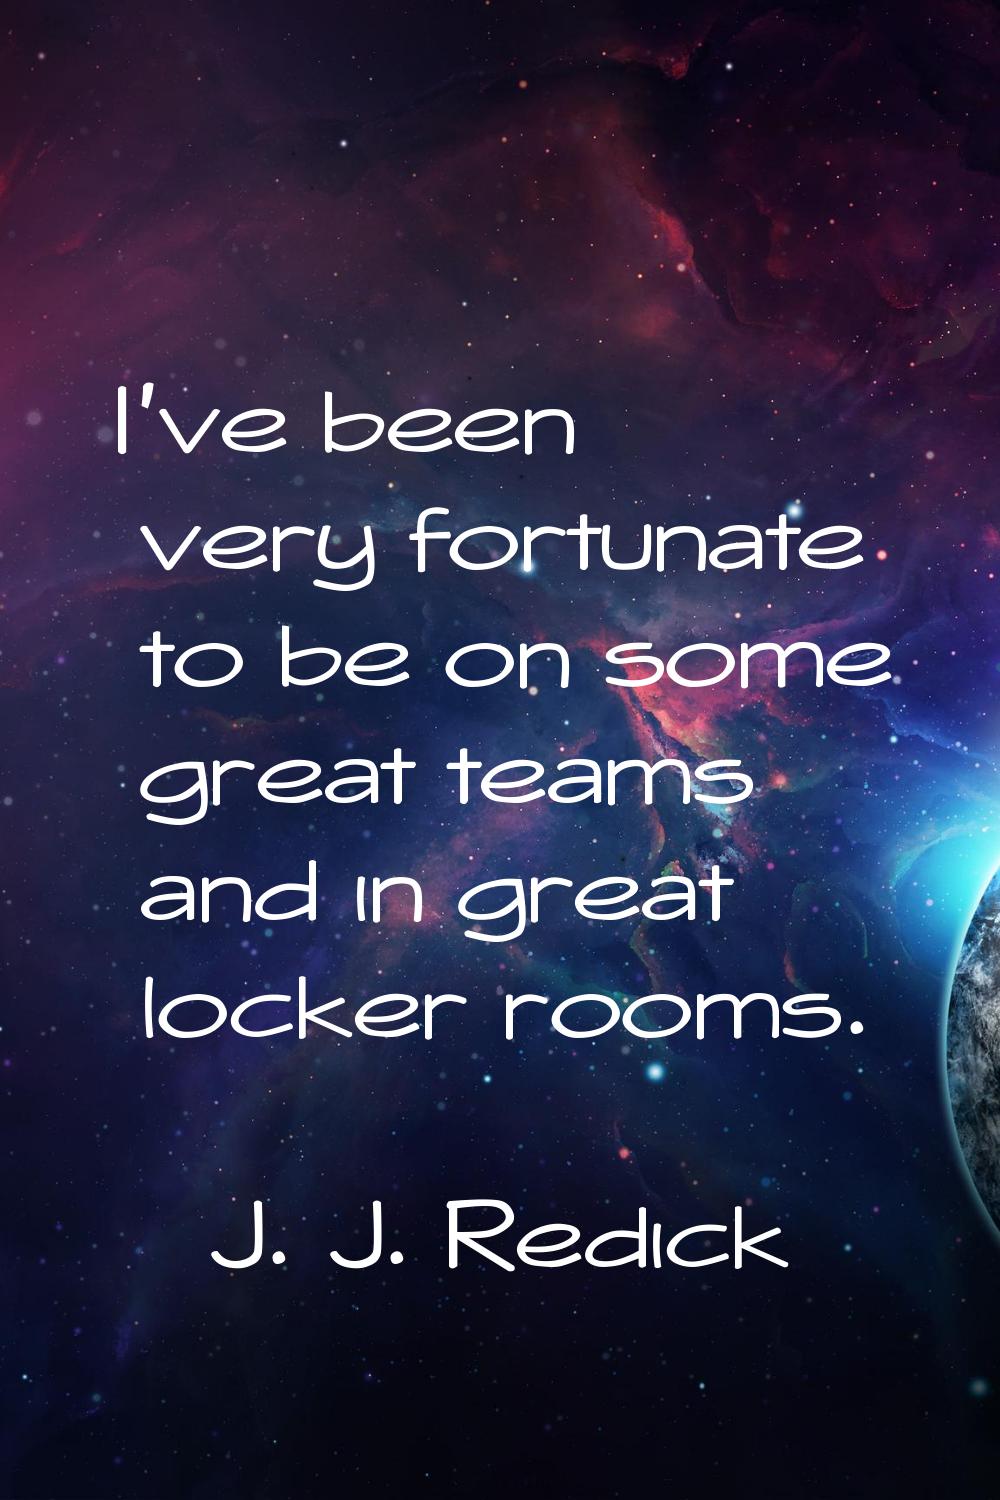 I've been very fortunate to be on some great teams and in great locker rooms.